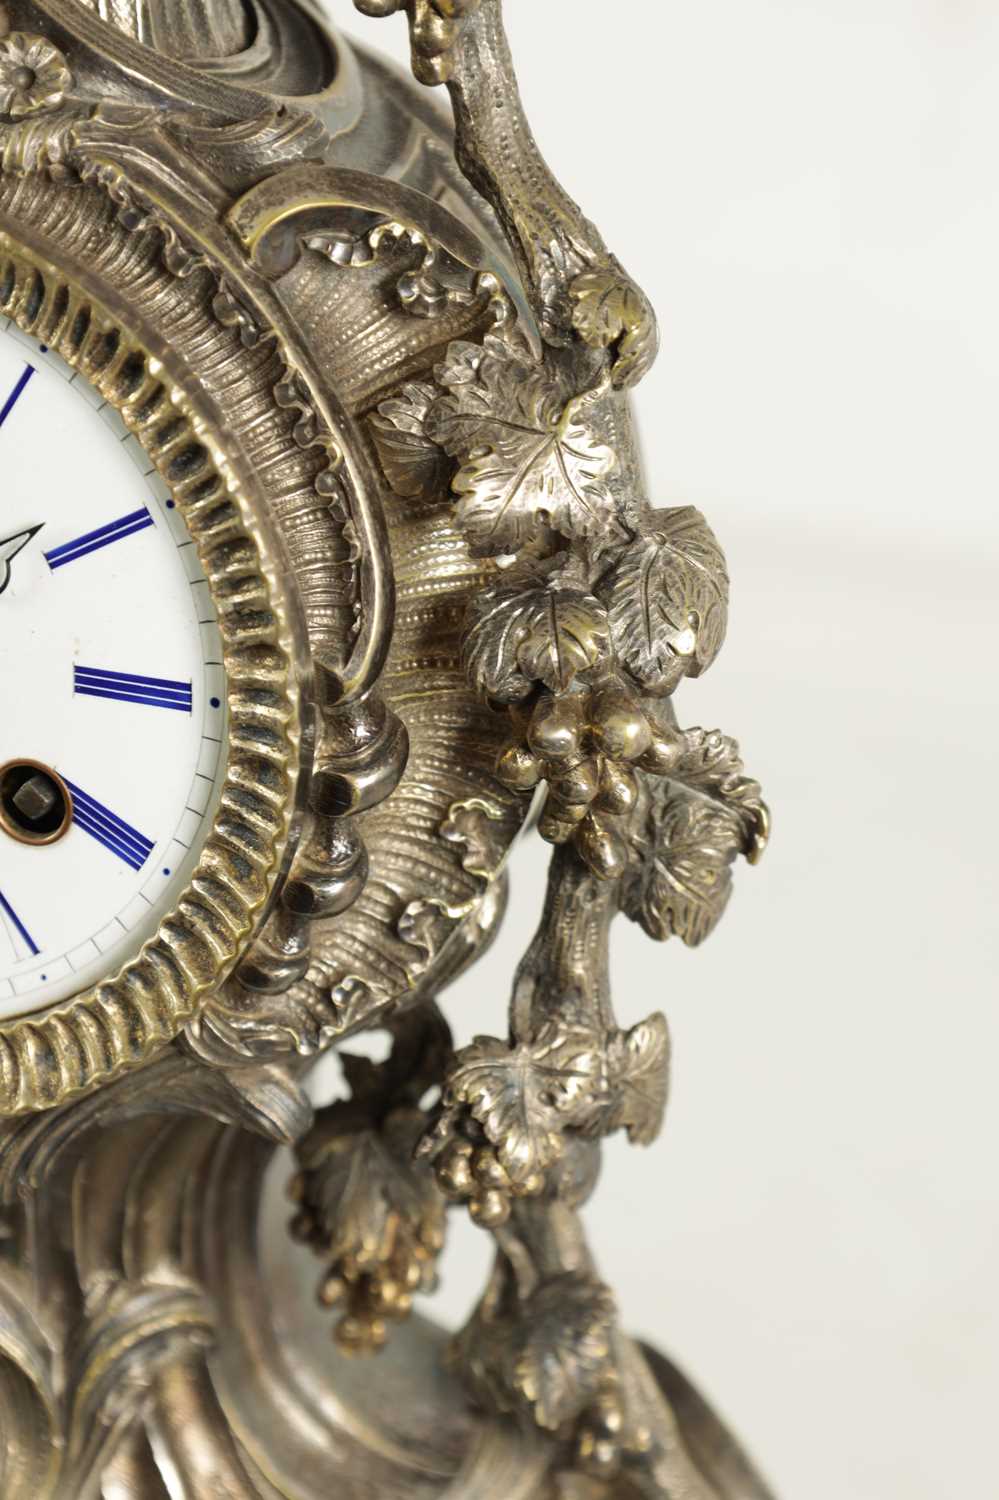 HENRY MARC, A PARIS. A MID 19TH CENTURY FRENCH ROCOCO STYLE SILVERED BRONZE MANTEL CLOCK - Image 6 of 10